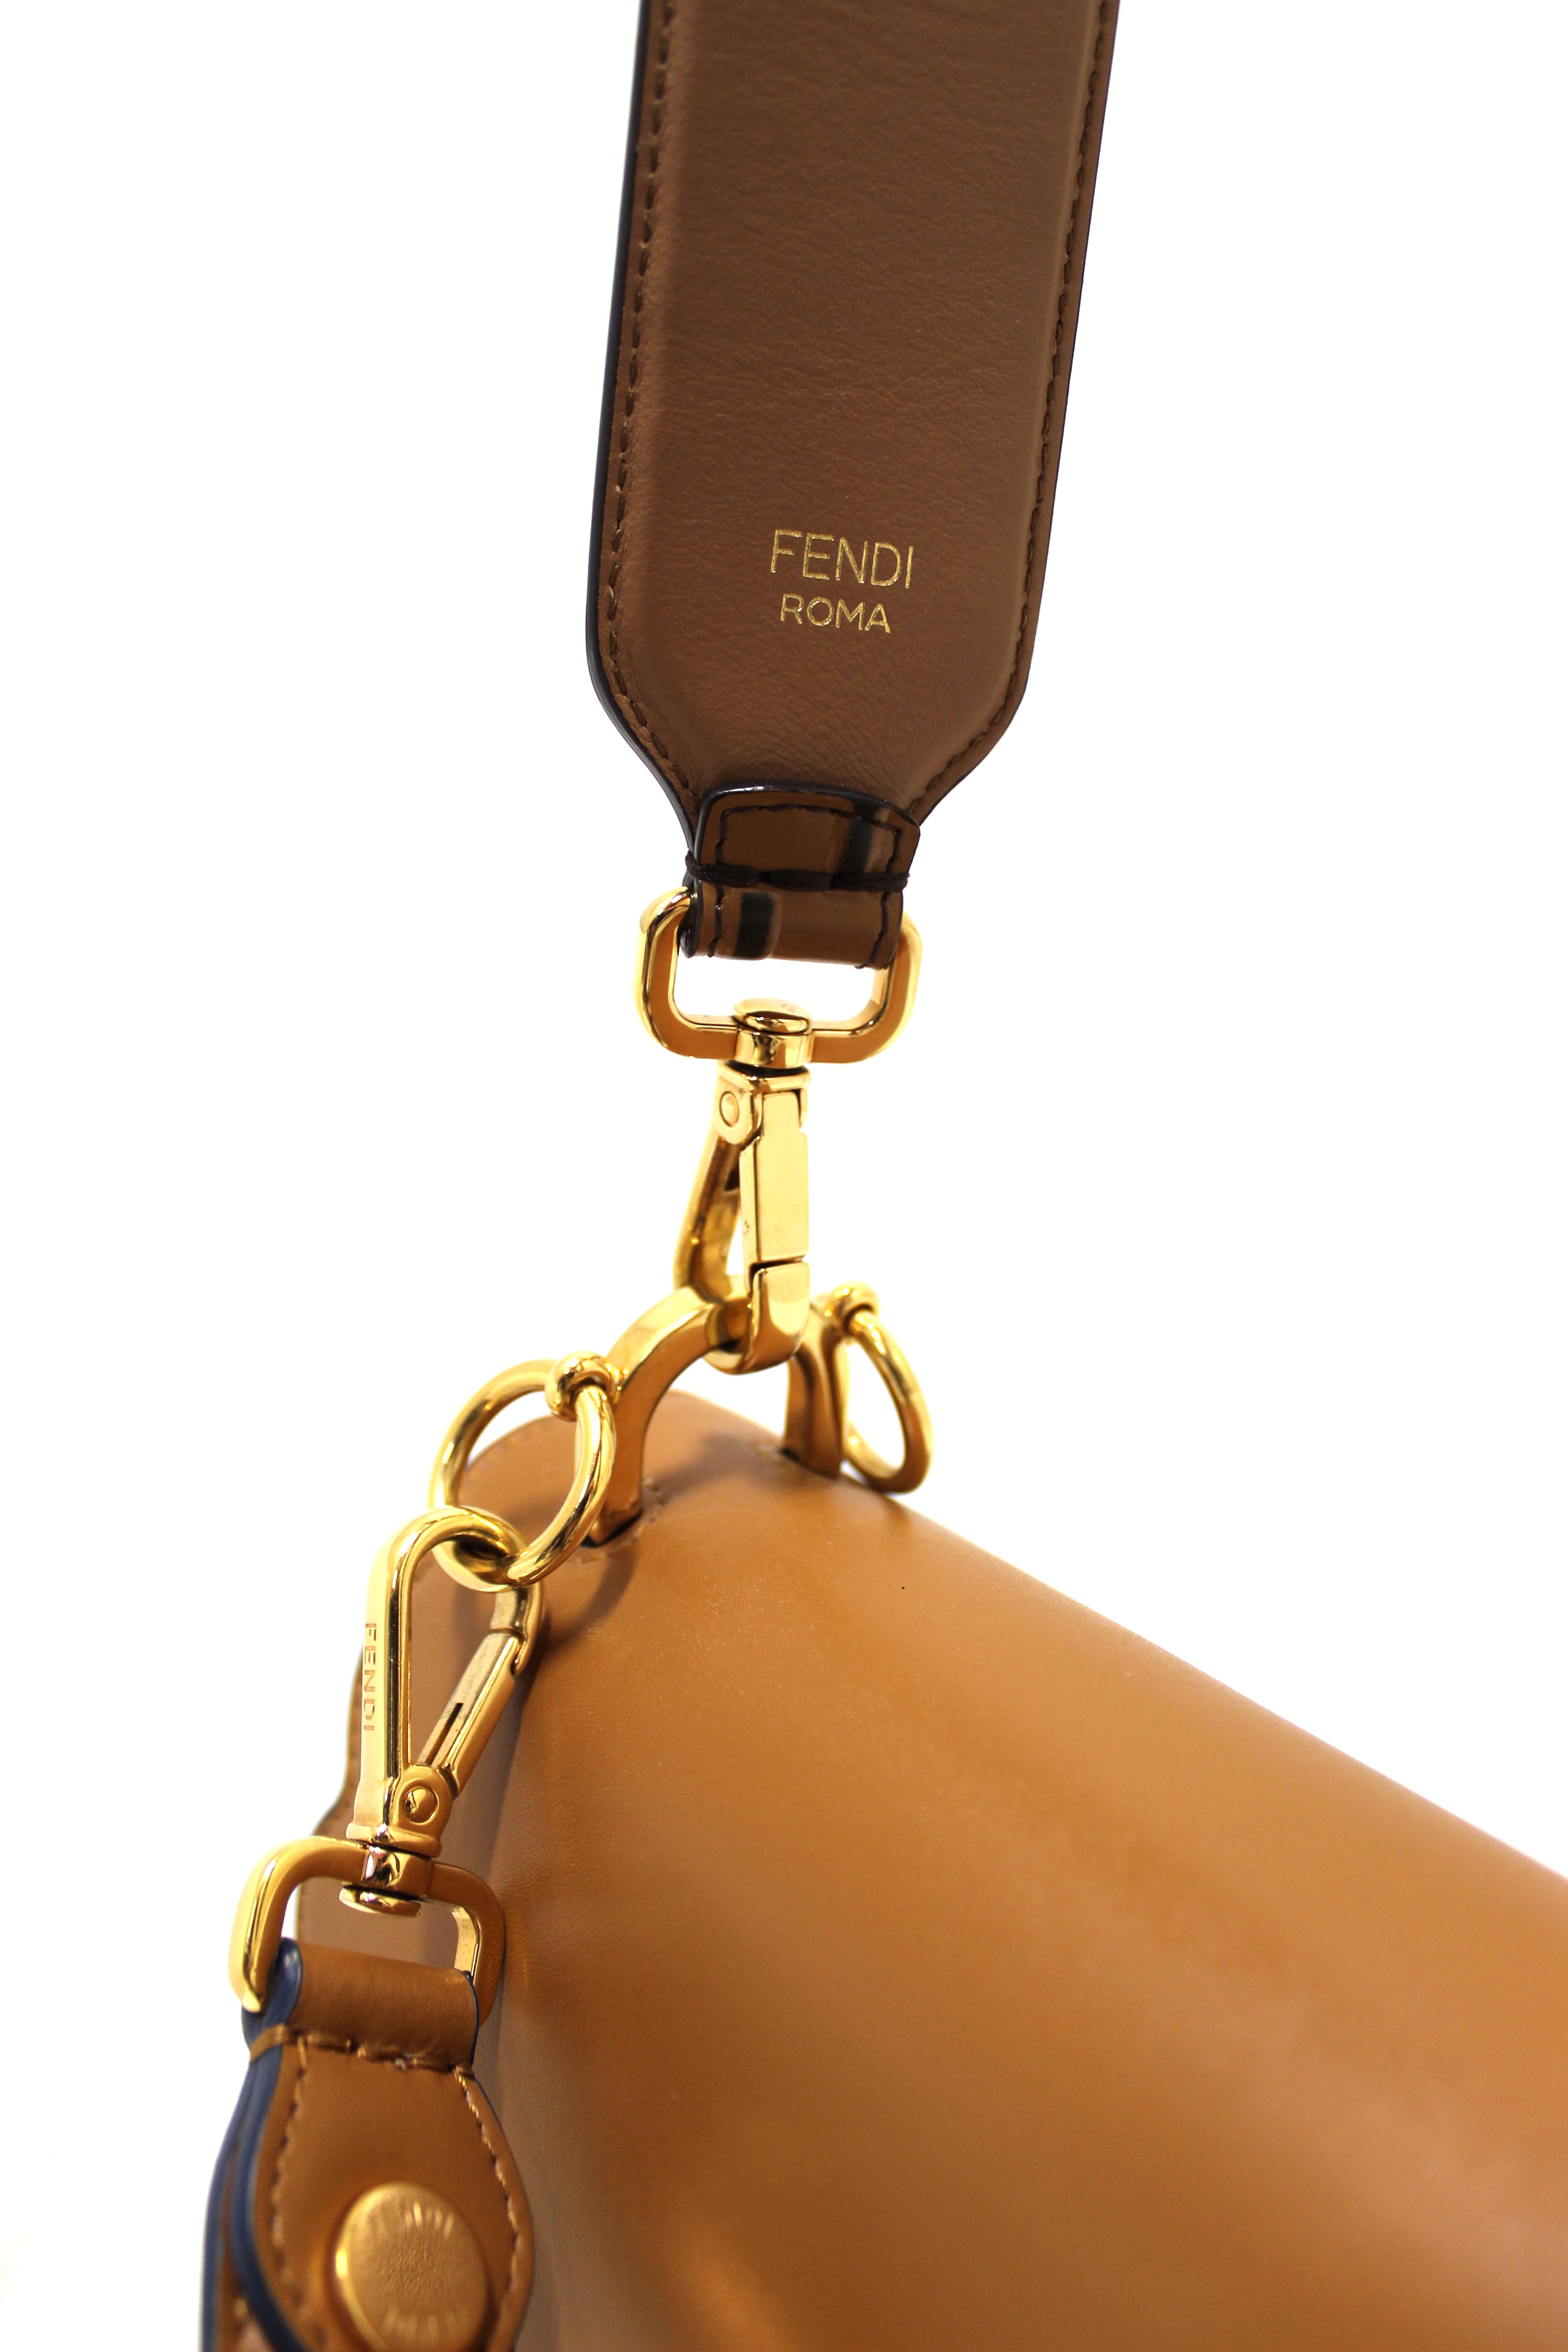 Authentic Fendi Brown Scallop Leather Mini I Kan Chain Shoulder Bag with Extra Fendi Strap